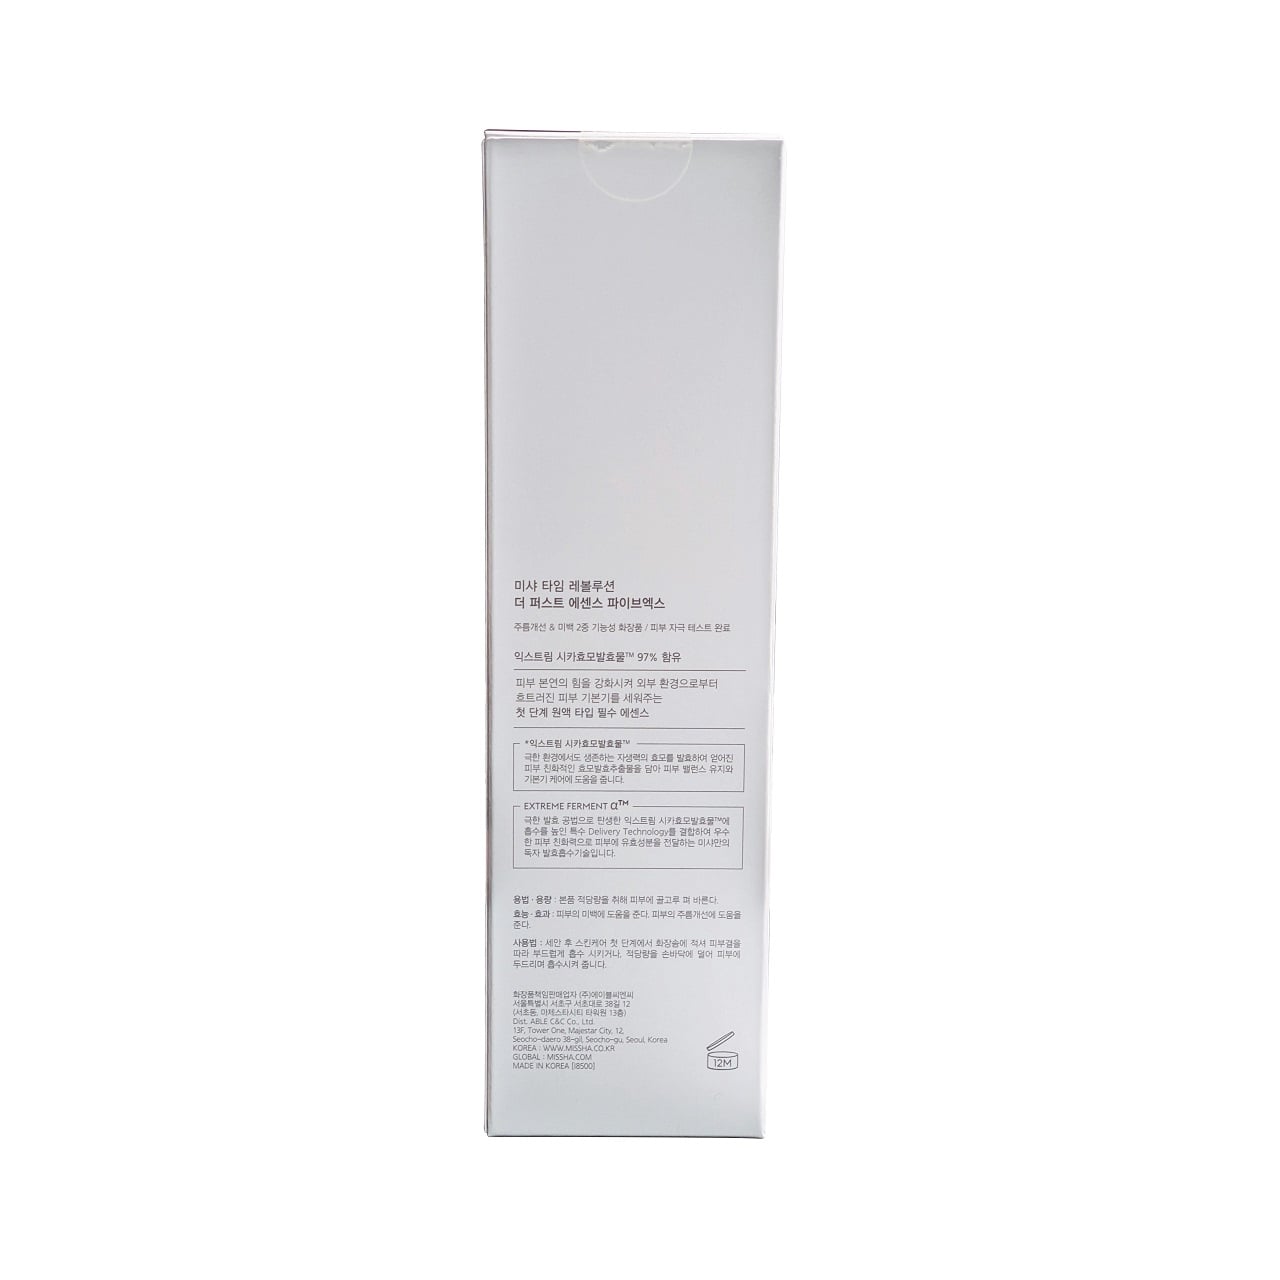 Description, directions, and caution for MISSHA Time Revolution The First Essence 5X (150 mL) in Korean